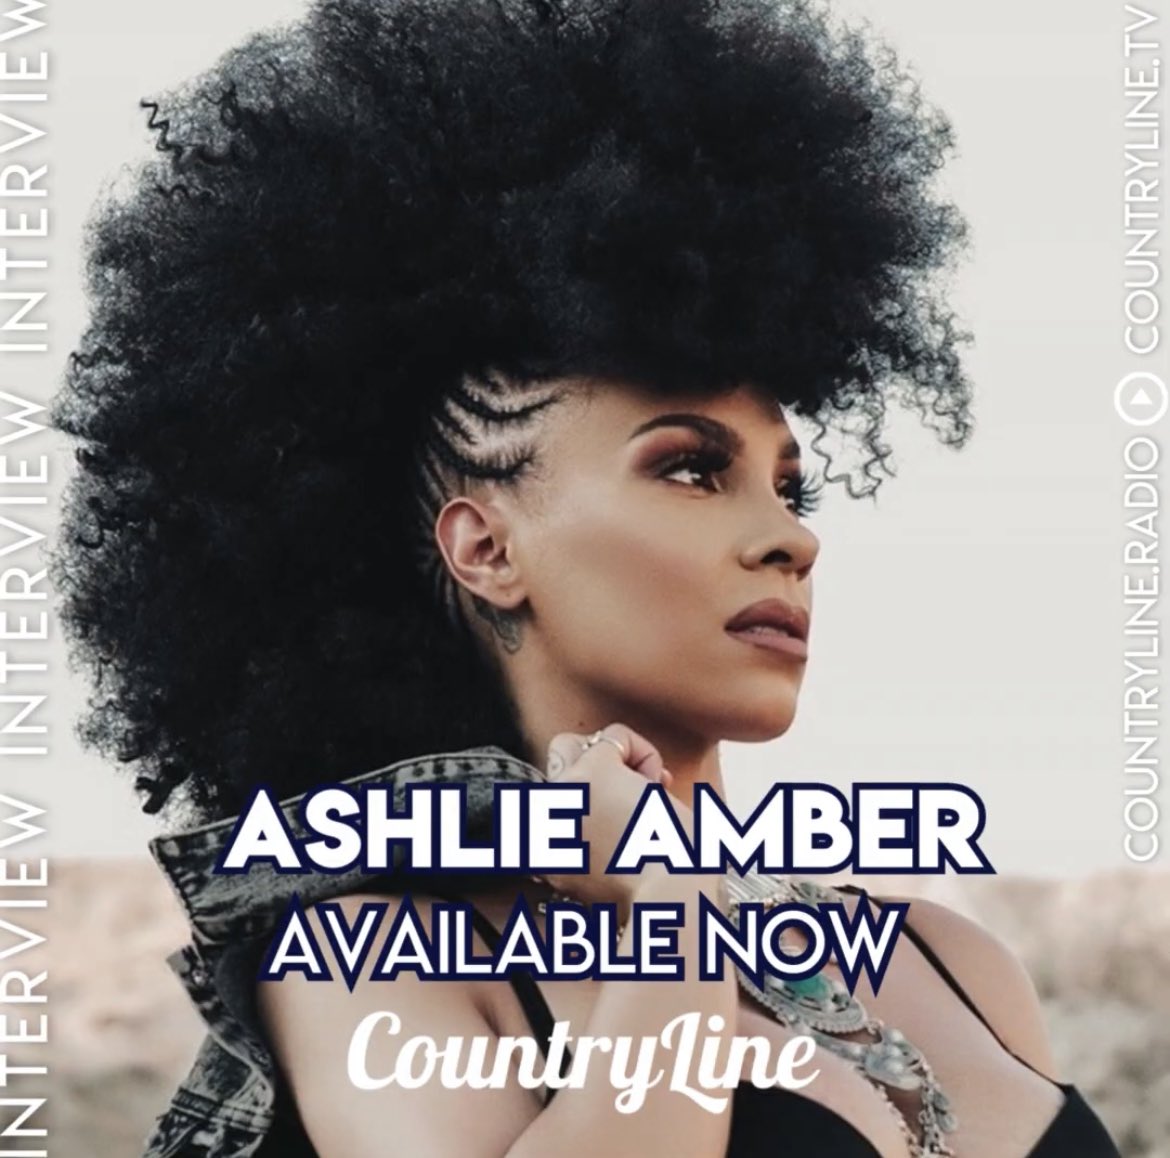 We chat with rising country sensation @ashlieamber about her brand new single 'Keep You Around', released ahead of her upcoming debut album. Blending country and r&b, Ashlie speaks on flipping genres, Beyoncé's recent impact on the industry, and more! ⬇️ bit.ly/3JI4wzv